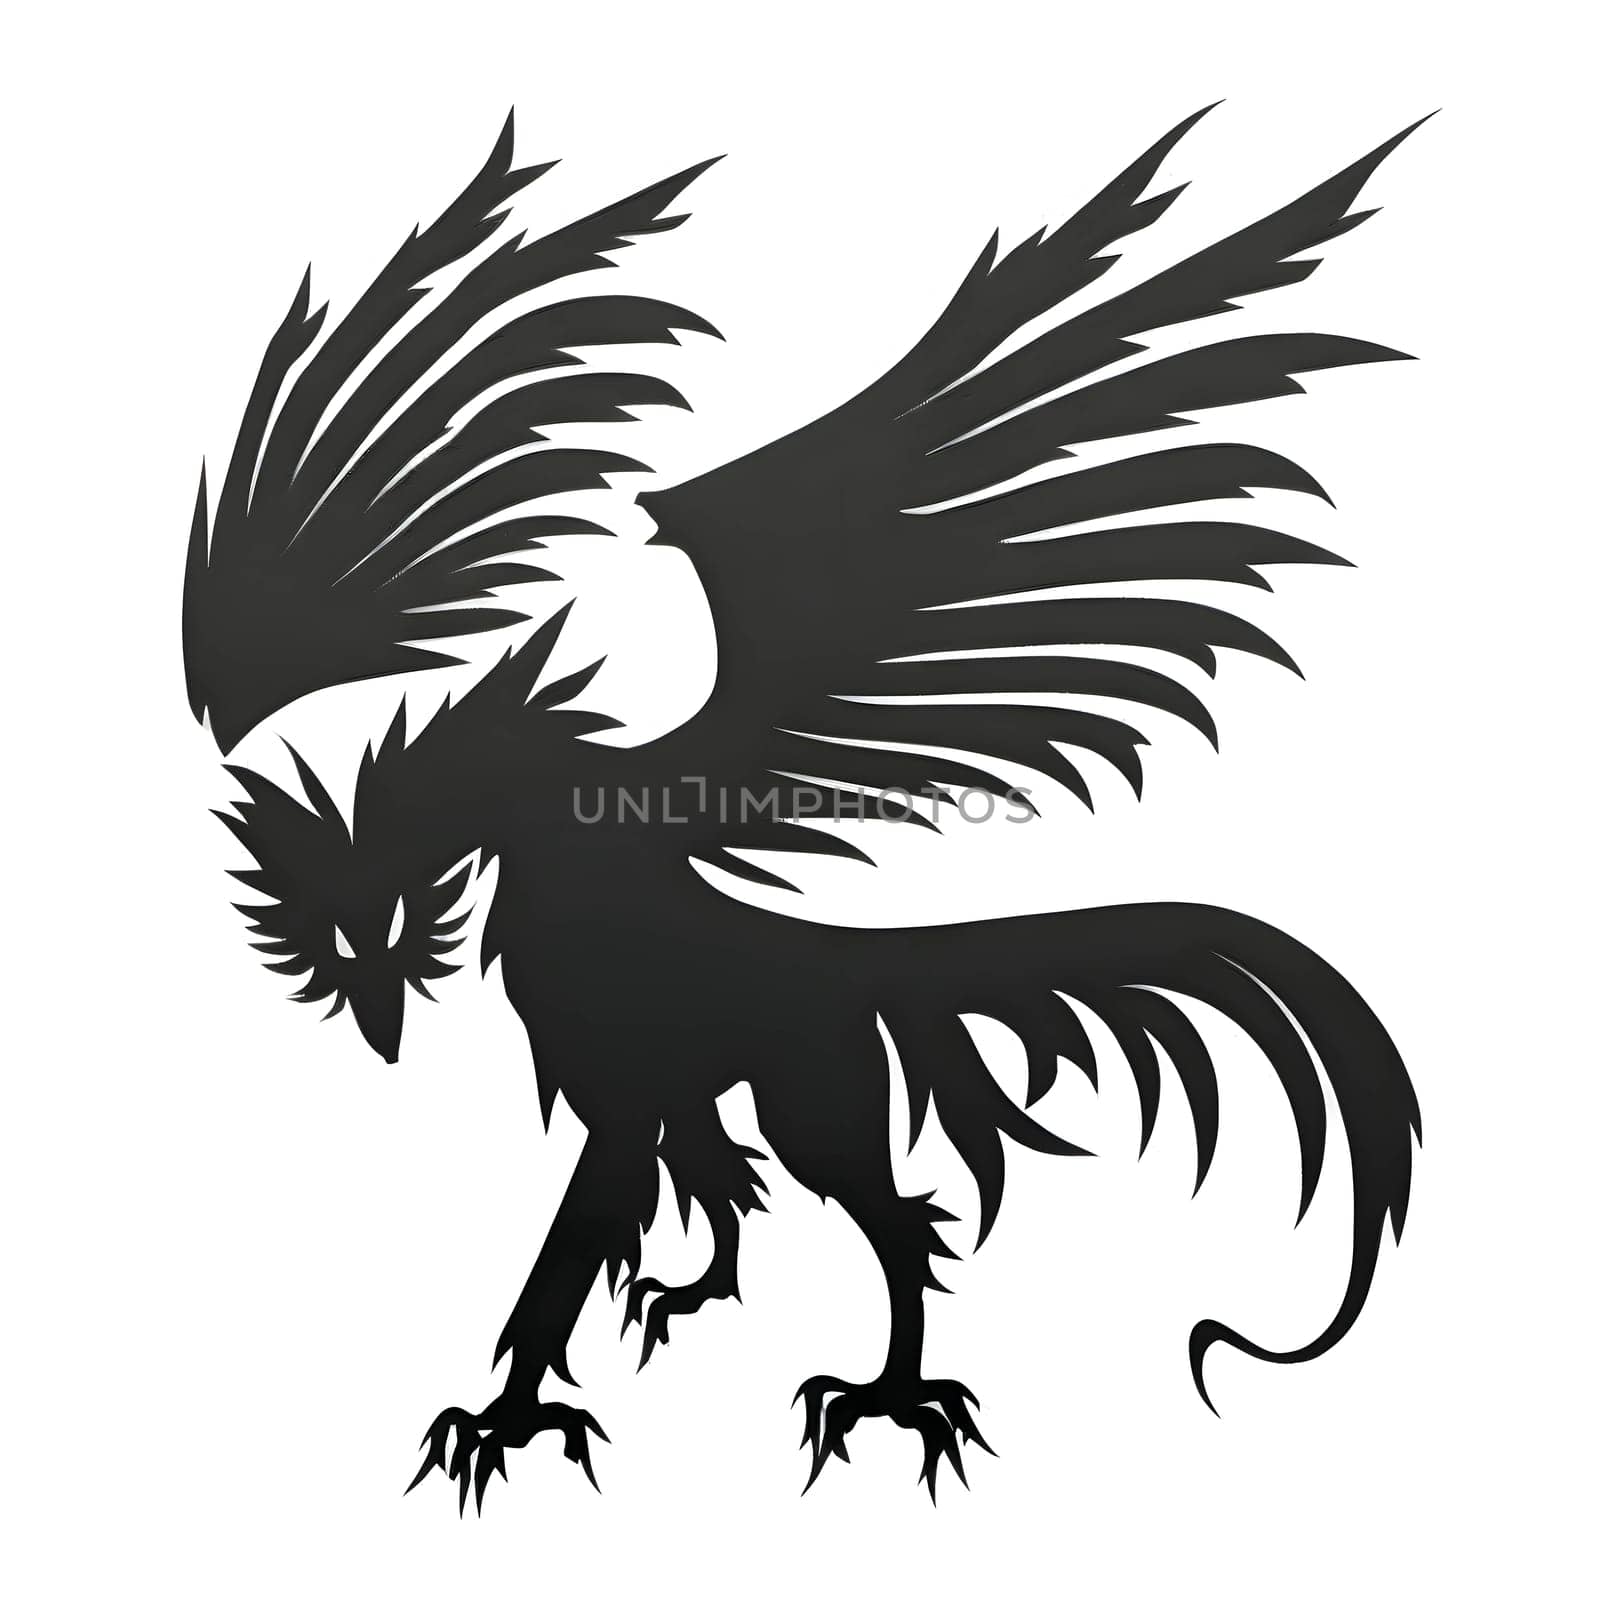 Vector illustration of a dragon in black silhouette against a clean white background, capturing graceful forms.